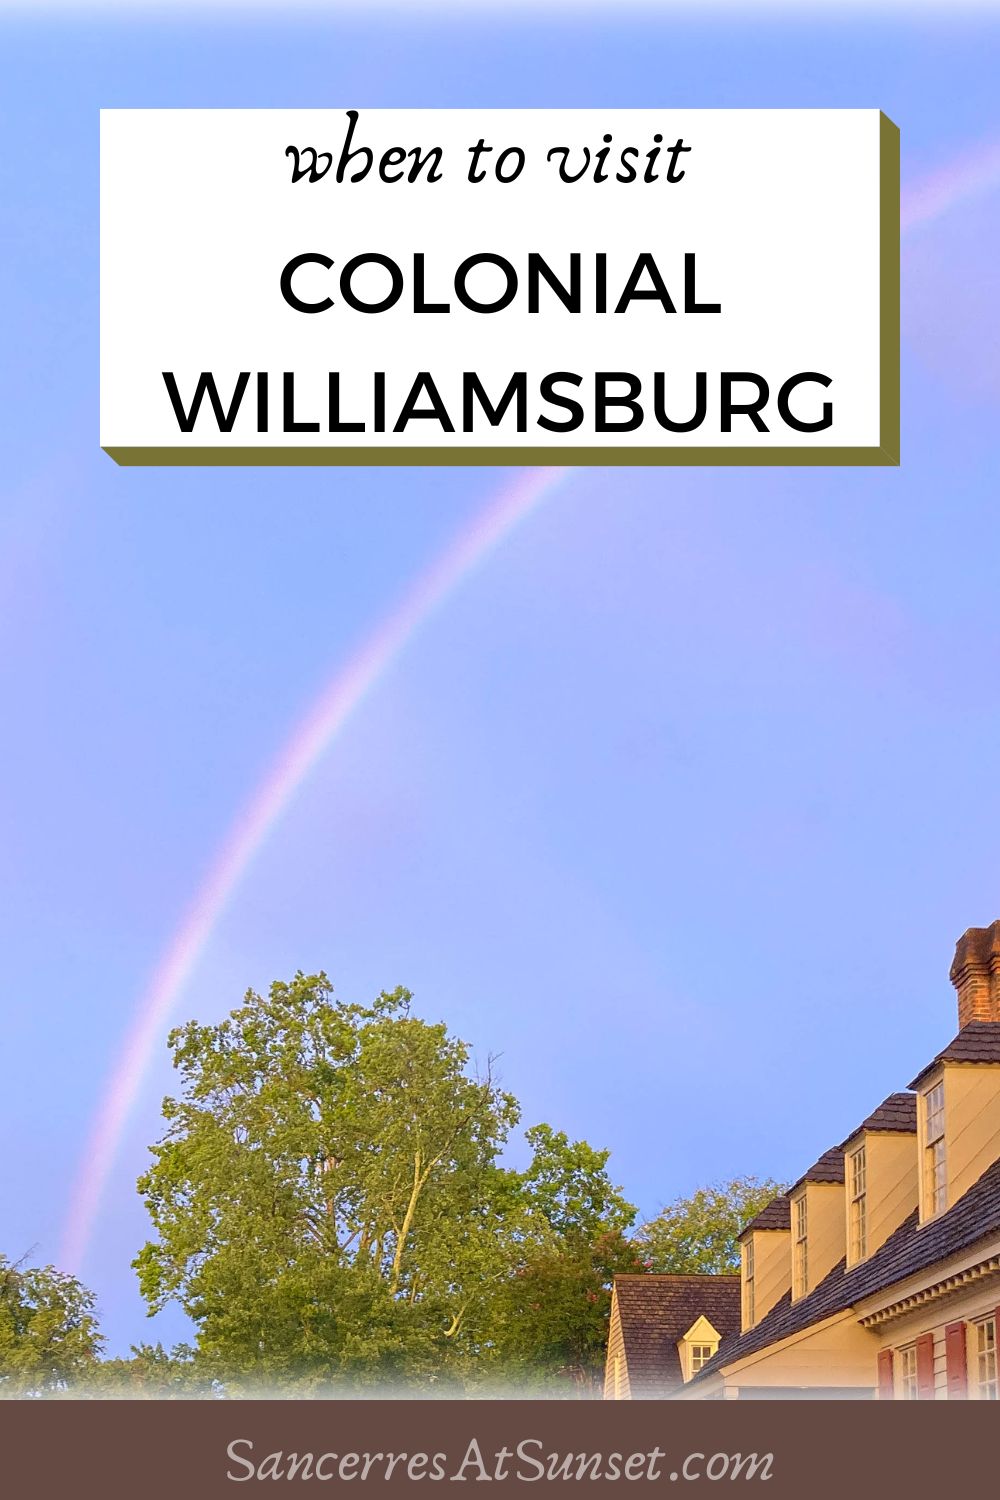 When to Visit Colonial Williamsburg